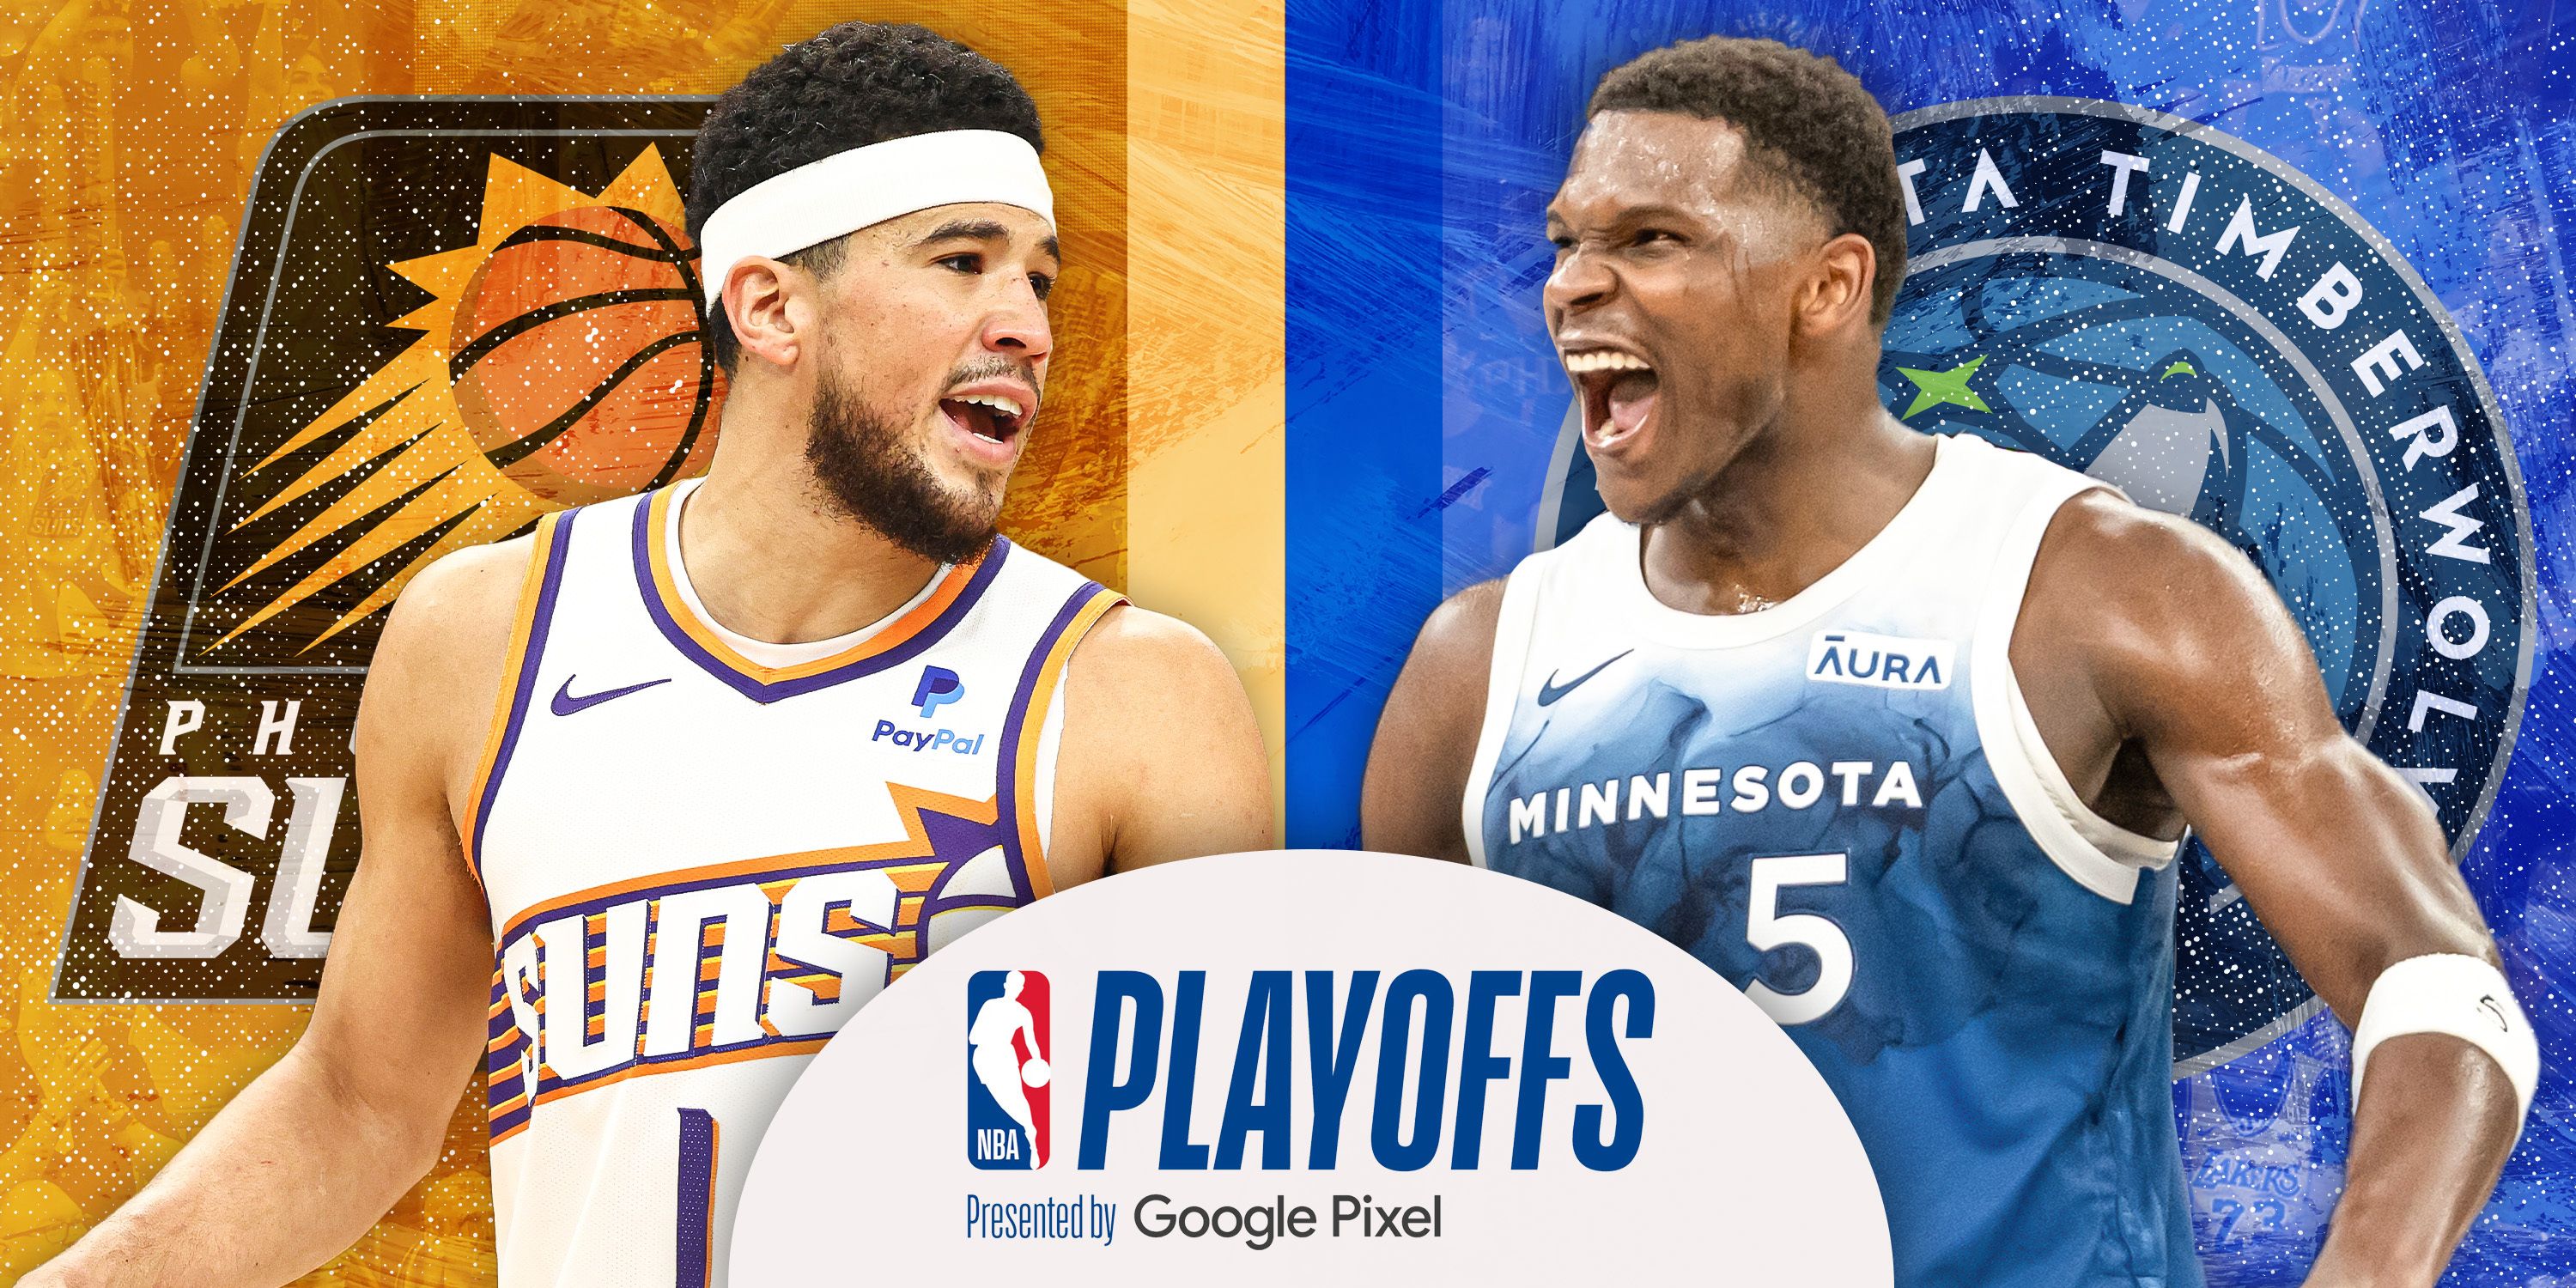 NBA Playoffs: Timberwolves-Suns Preview, Head-to-Head, Statistical Breakdown